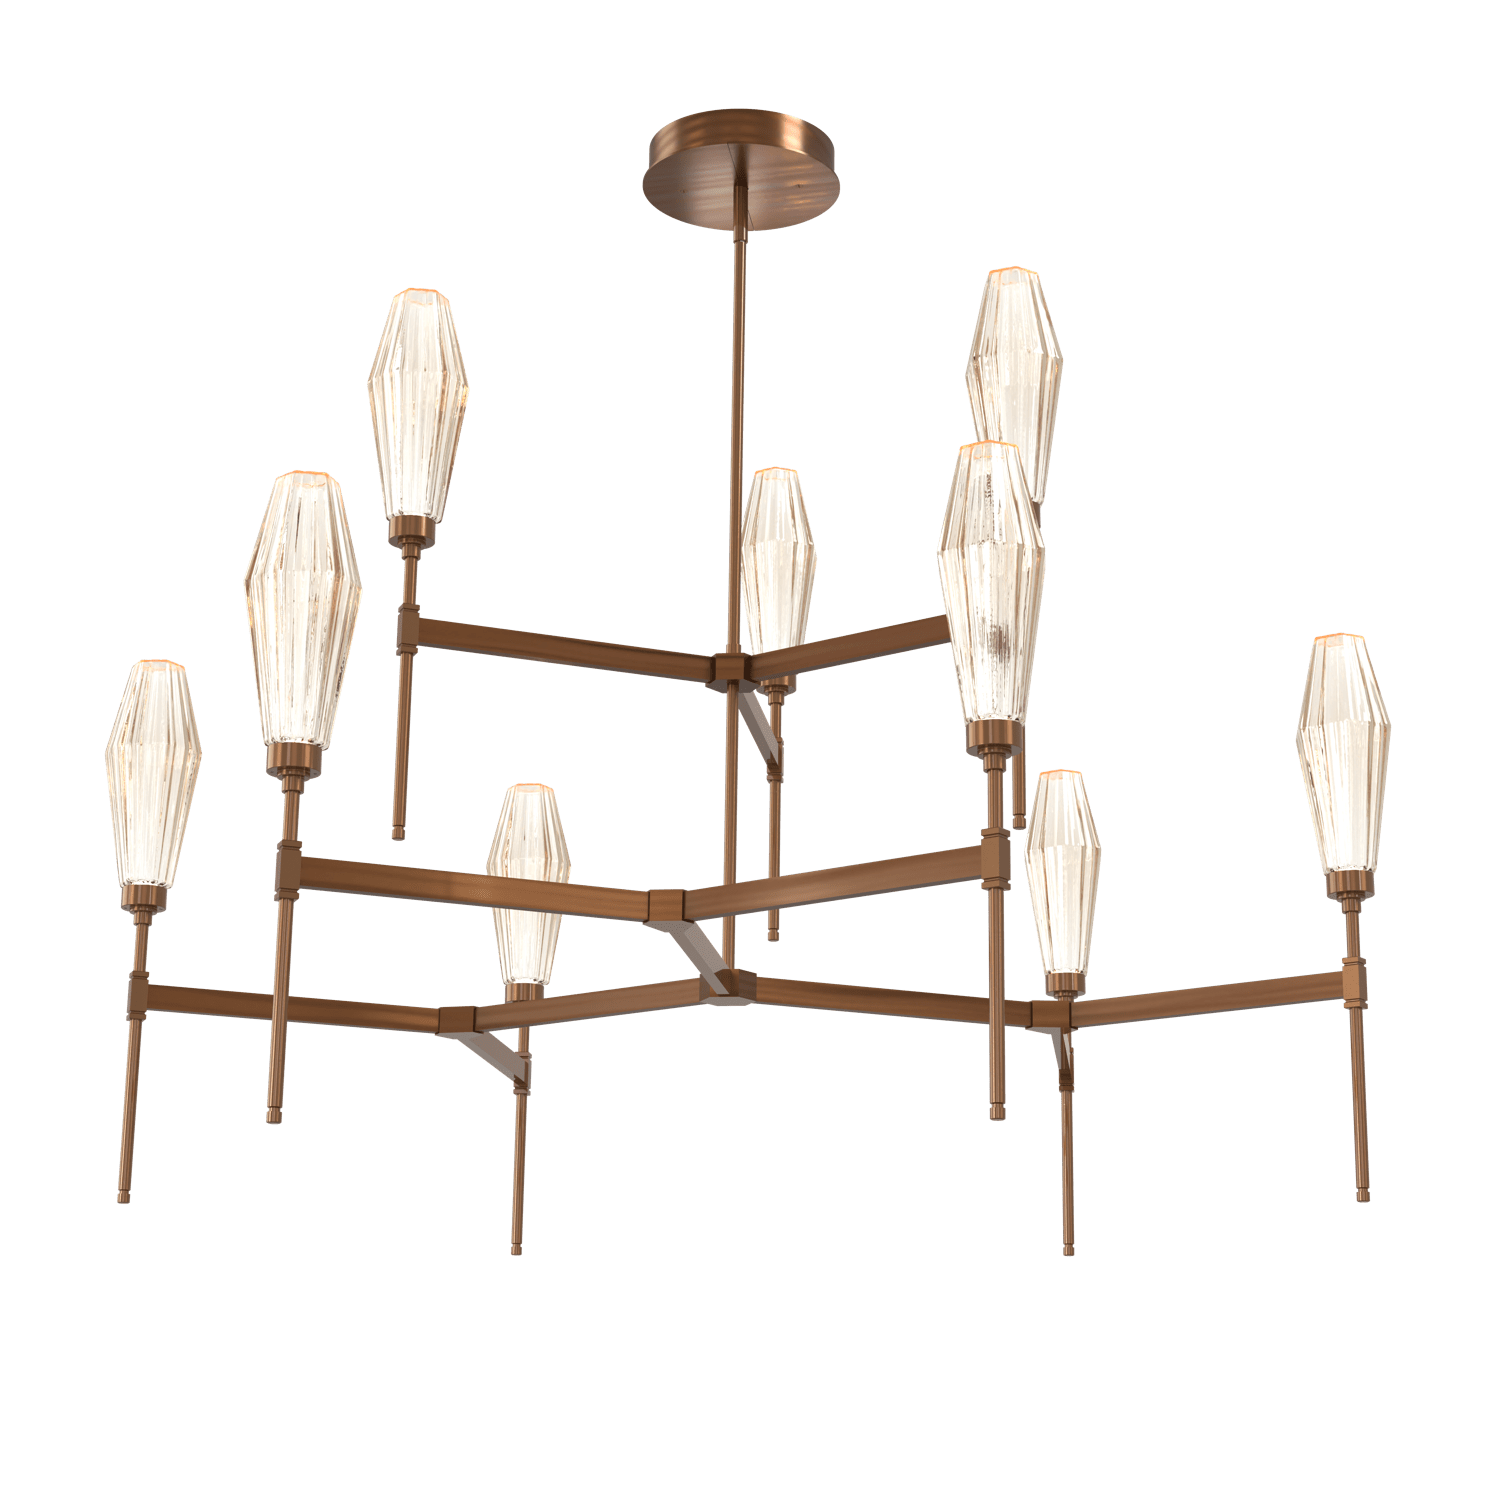 CHB0049-54-RB-RA-Hammerton-Studio-Aalto-54-inch-round-two-tier-belvedere-chandelier-with-oil-rubbed-bronze-finish-and-optic-ribbed-amber-glass-shades-and-LED-lamping